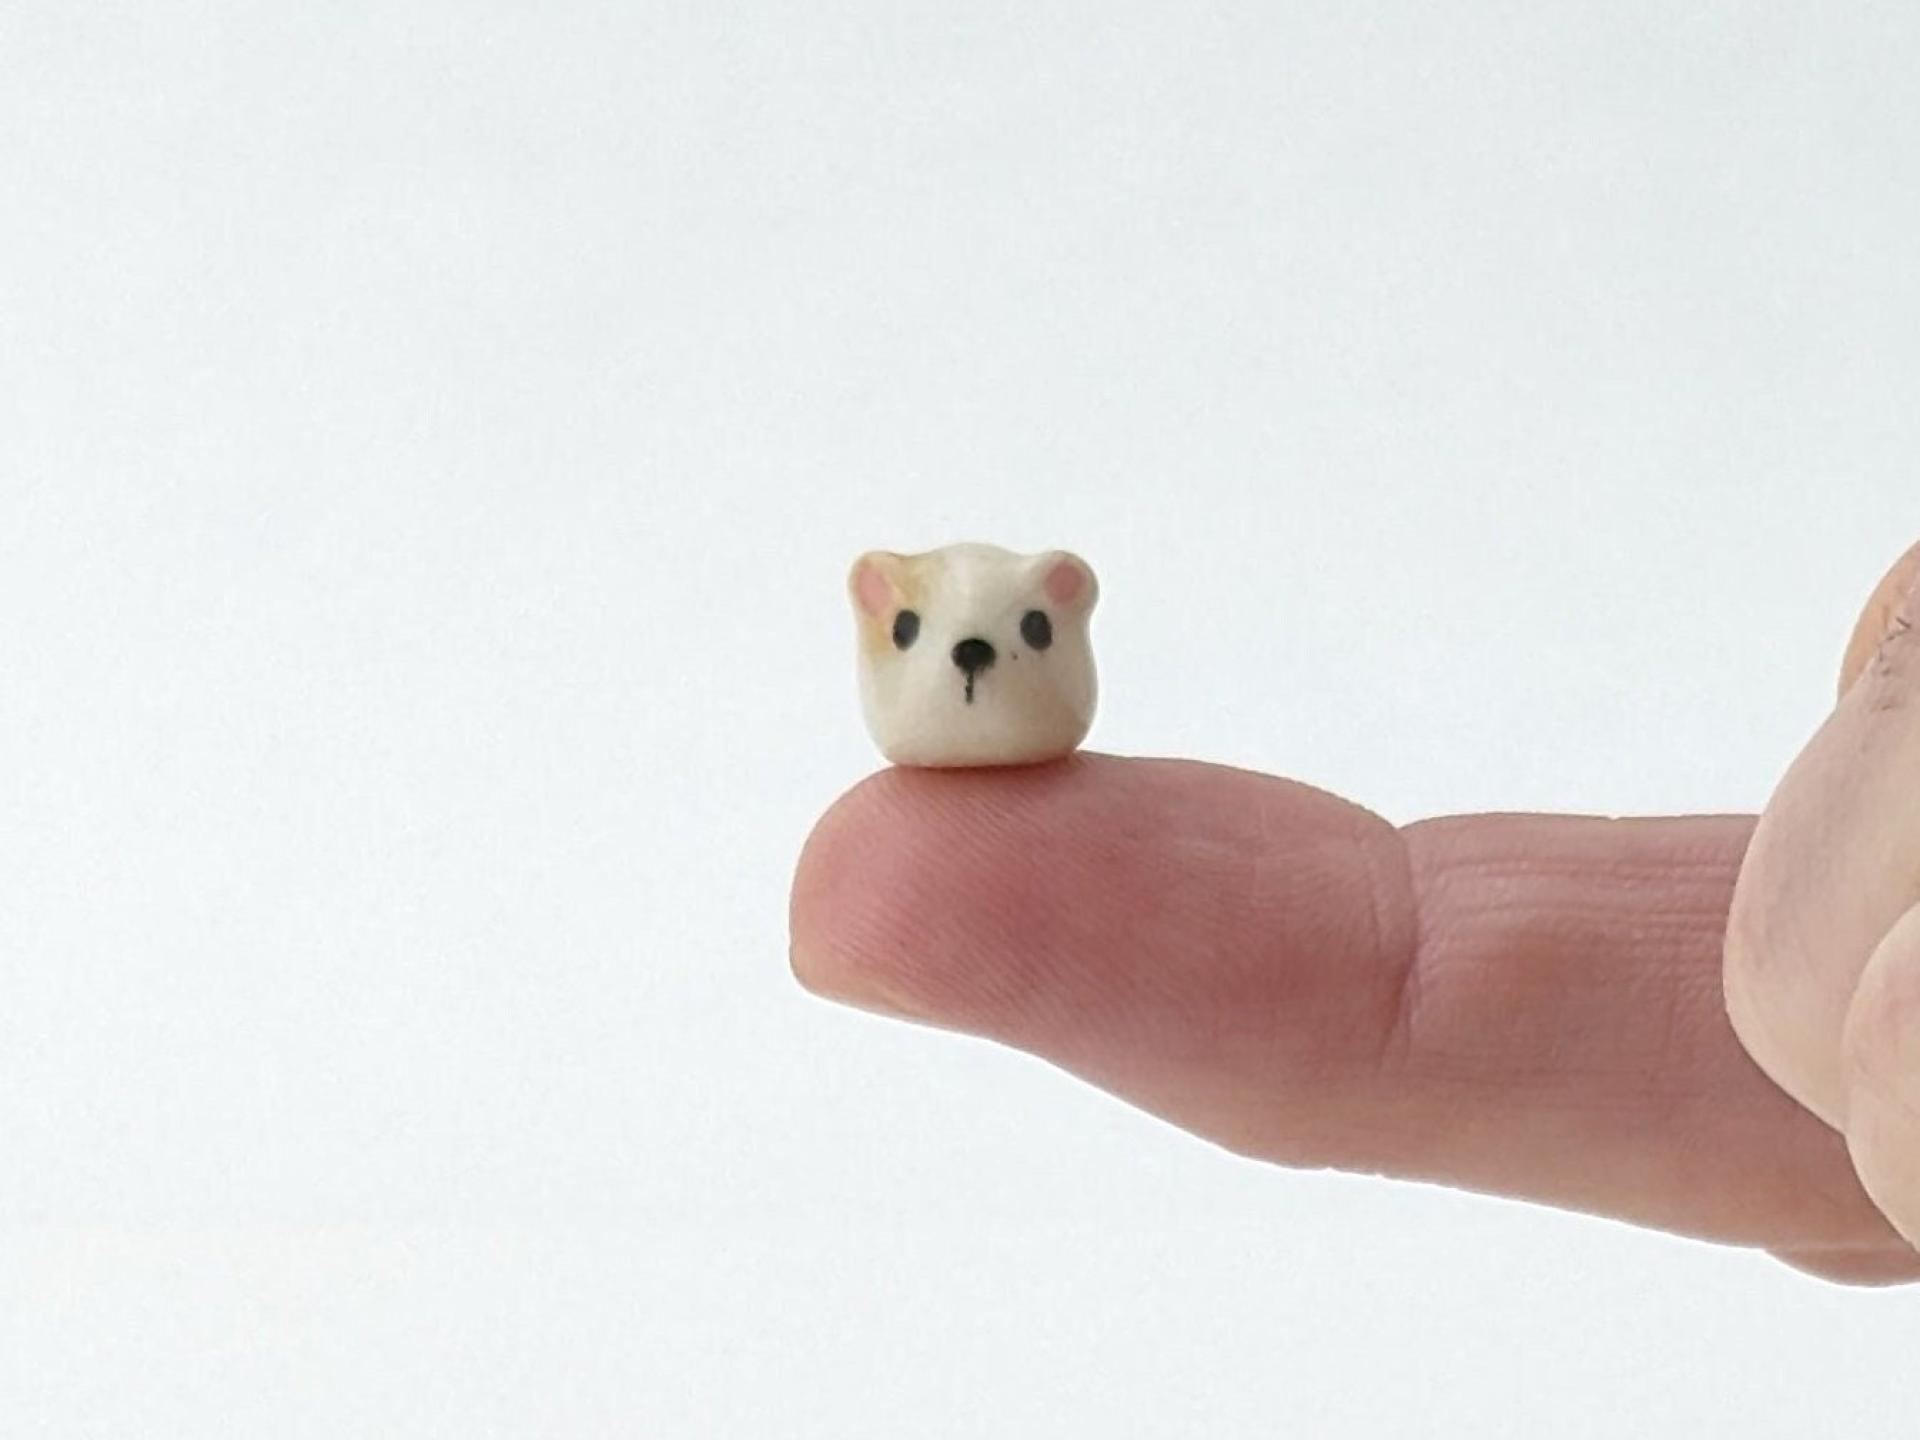 Cute handmde ceramic hamster figurine. Fight hunger with tiny Hamster of Hope. Small-batch ceramics. Hand-painted pottery.